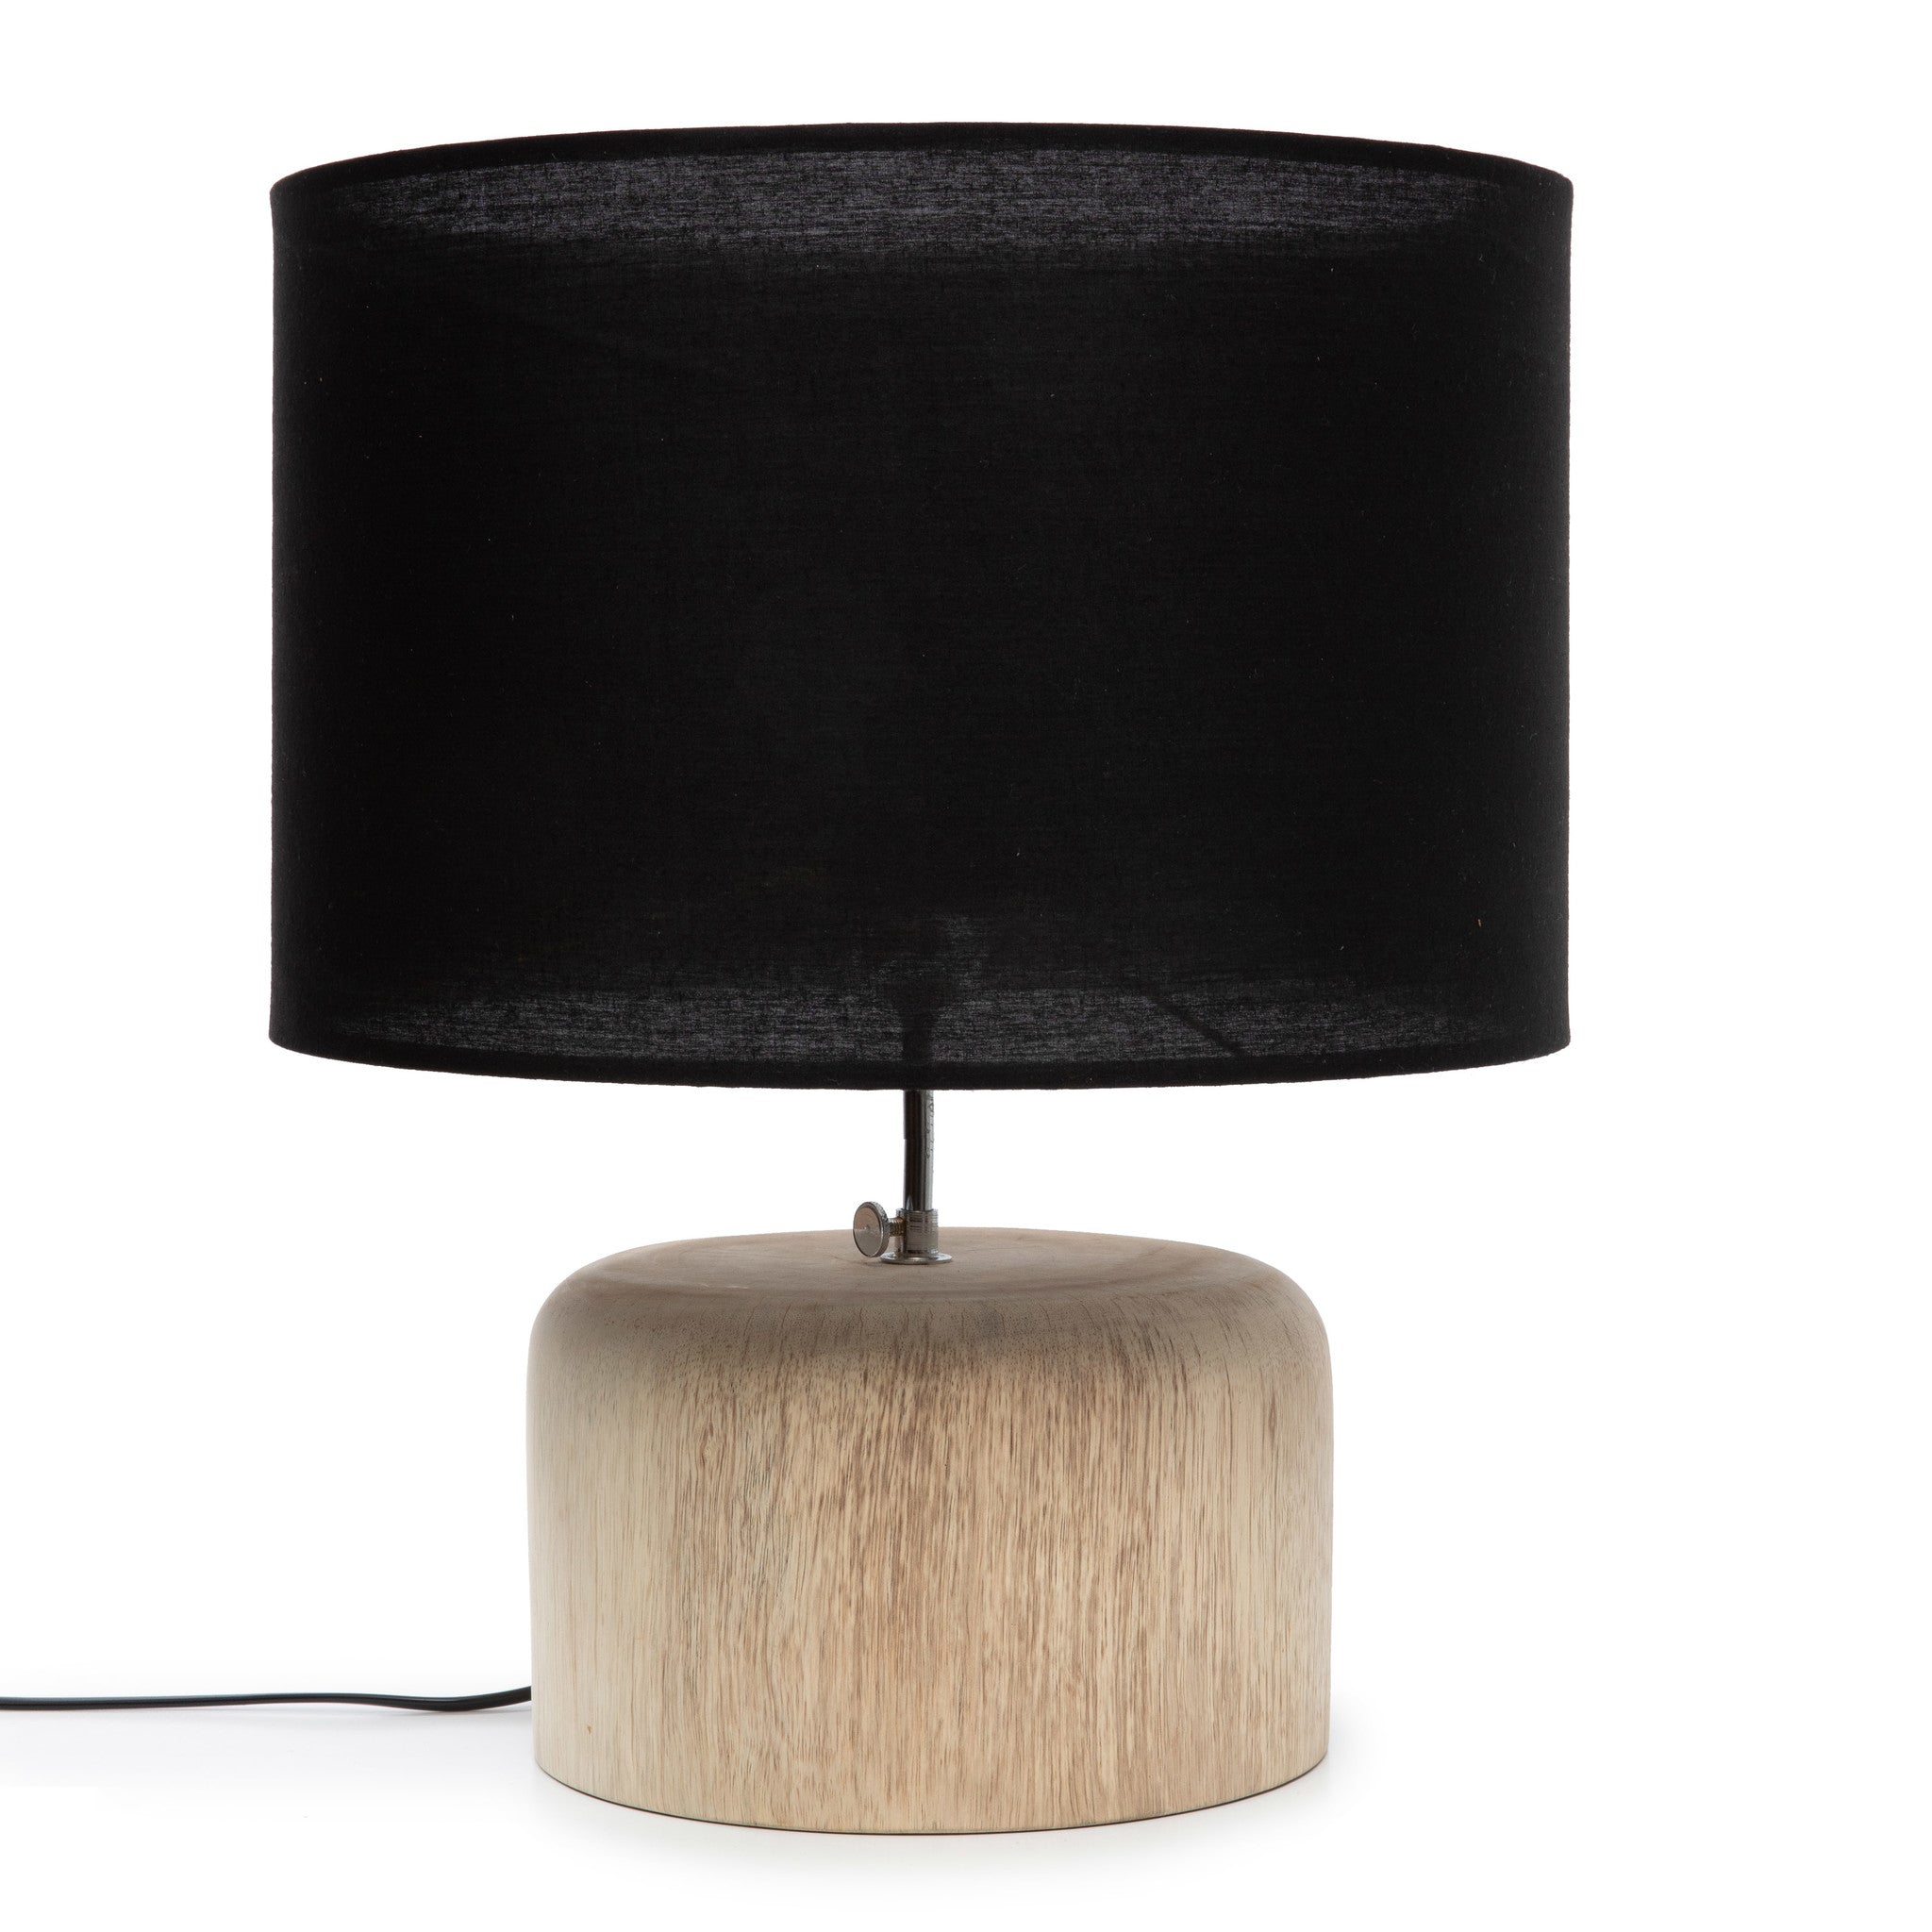 THE TEAK WOOD Table Lamp Black front view